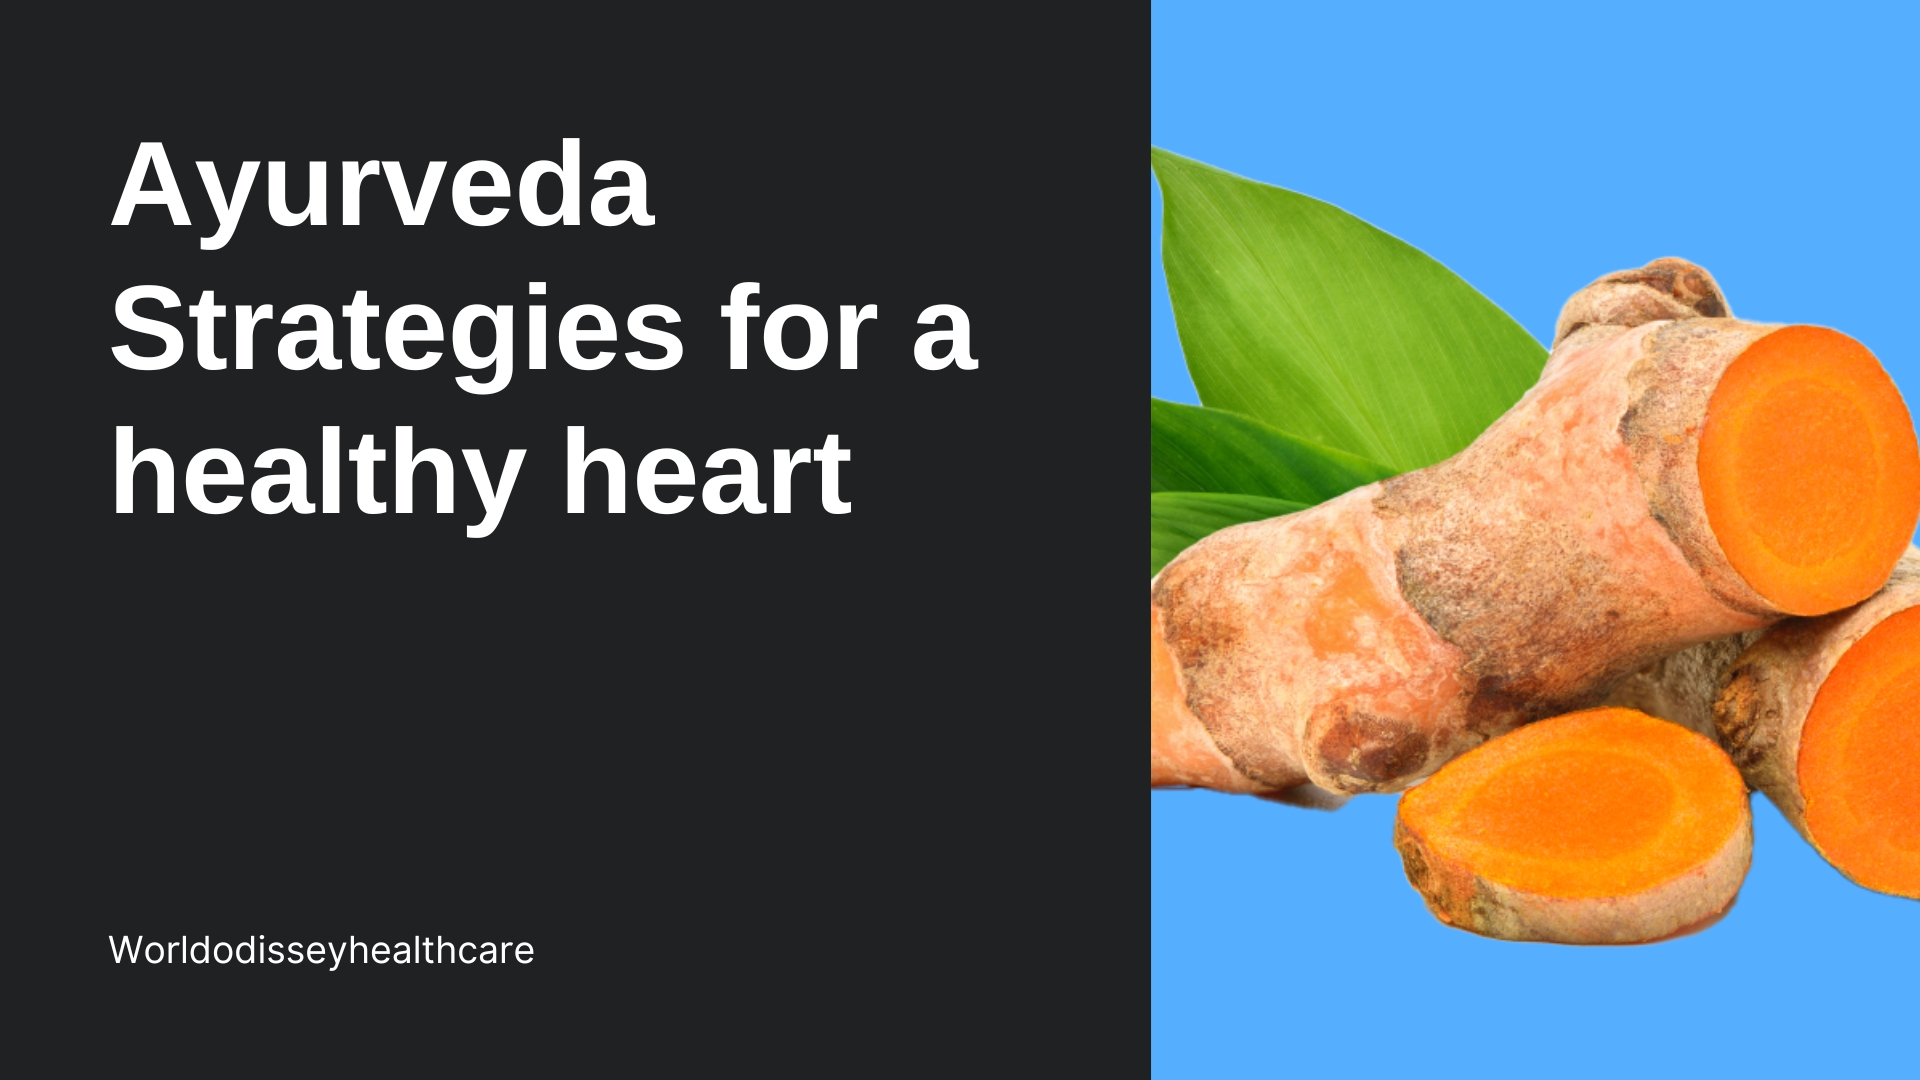 Ayurveda strategies for a healthy heart